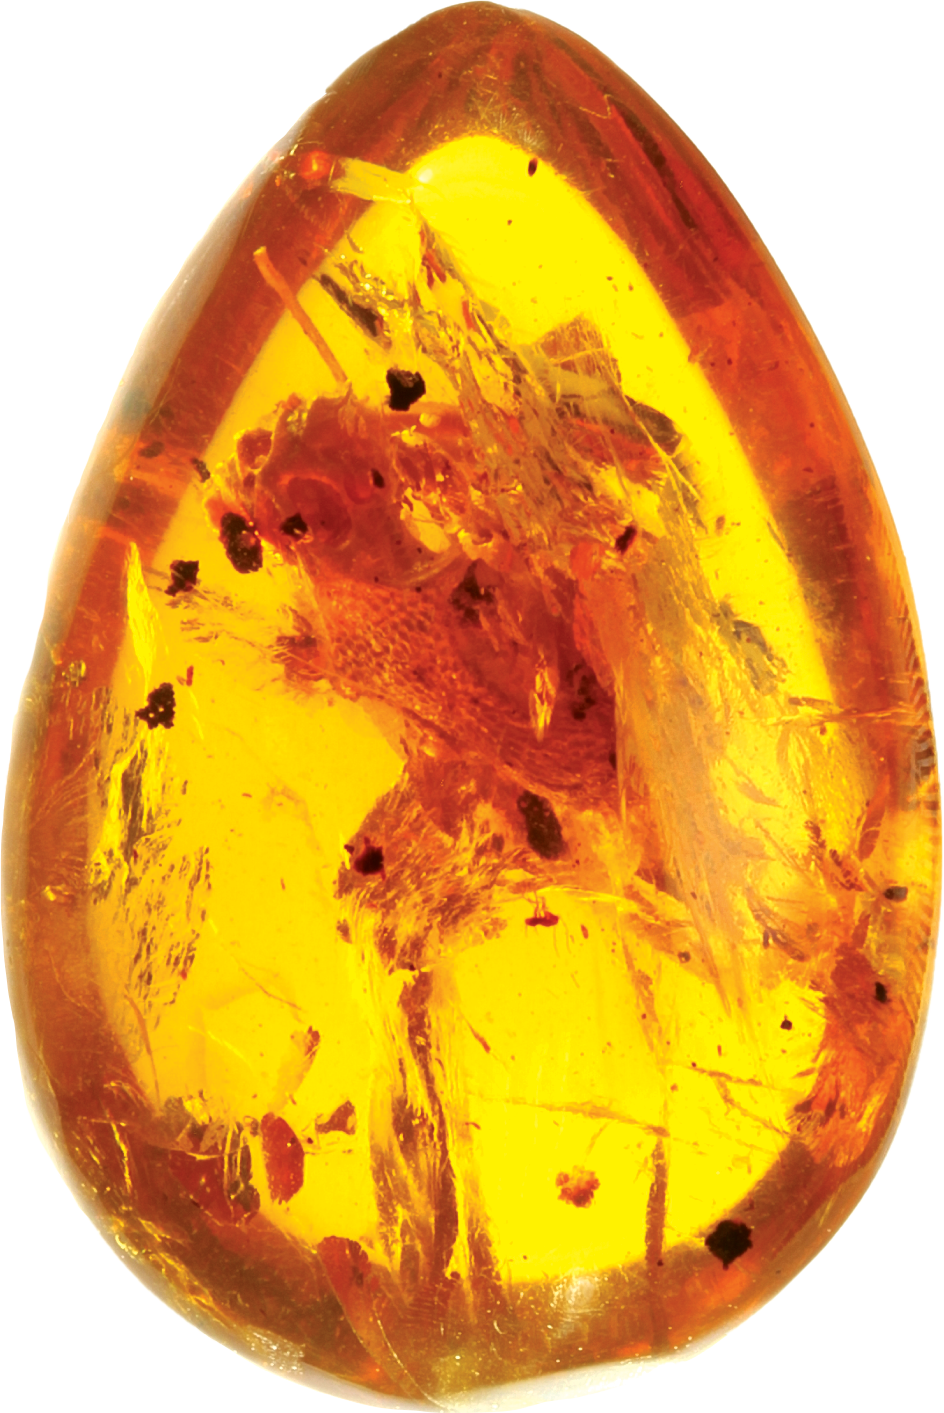 albanerpetontids fossil in amber 